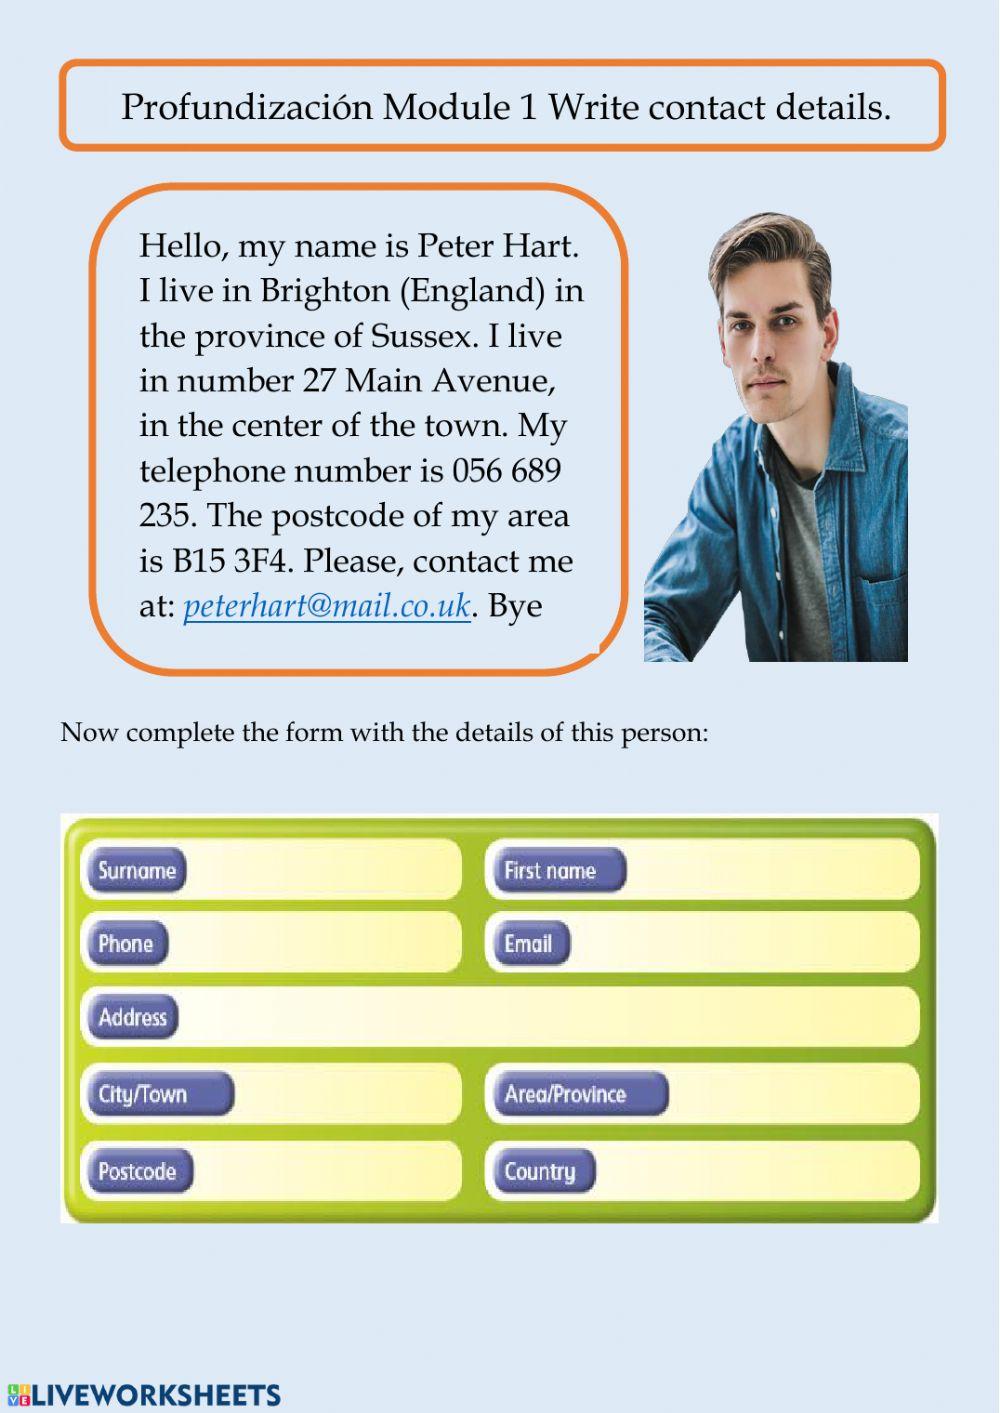 Complete a contact details form